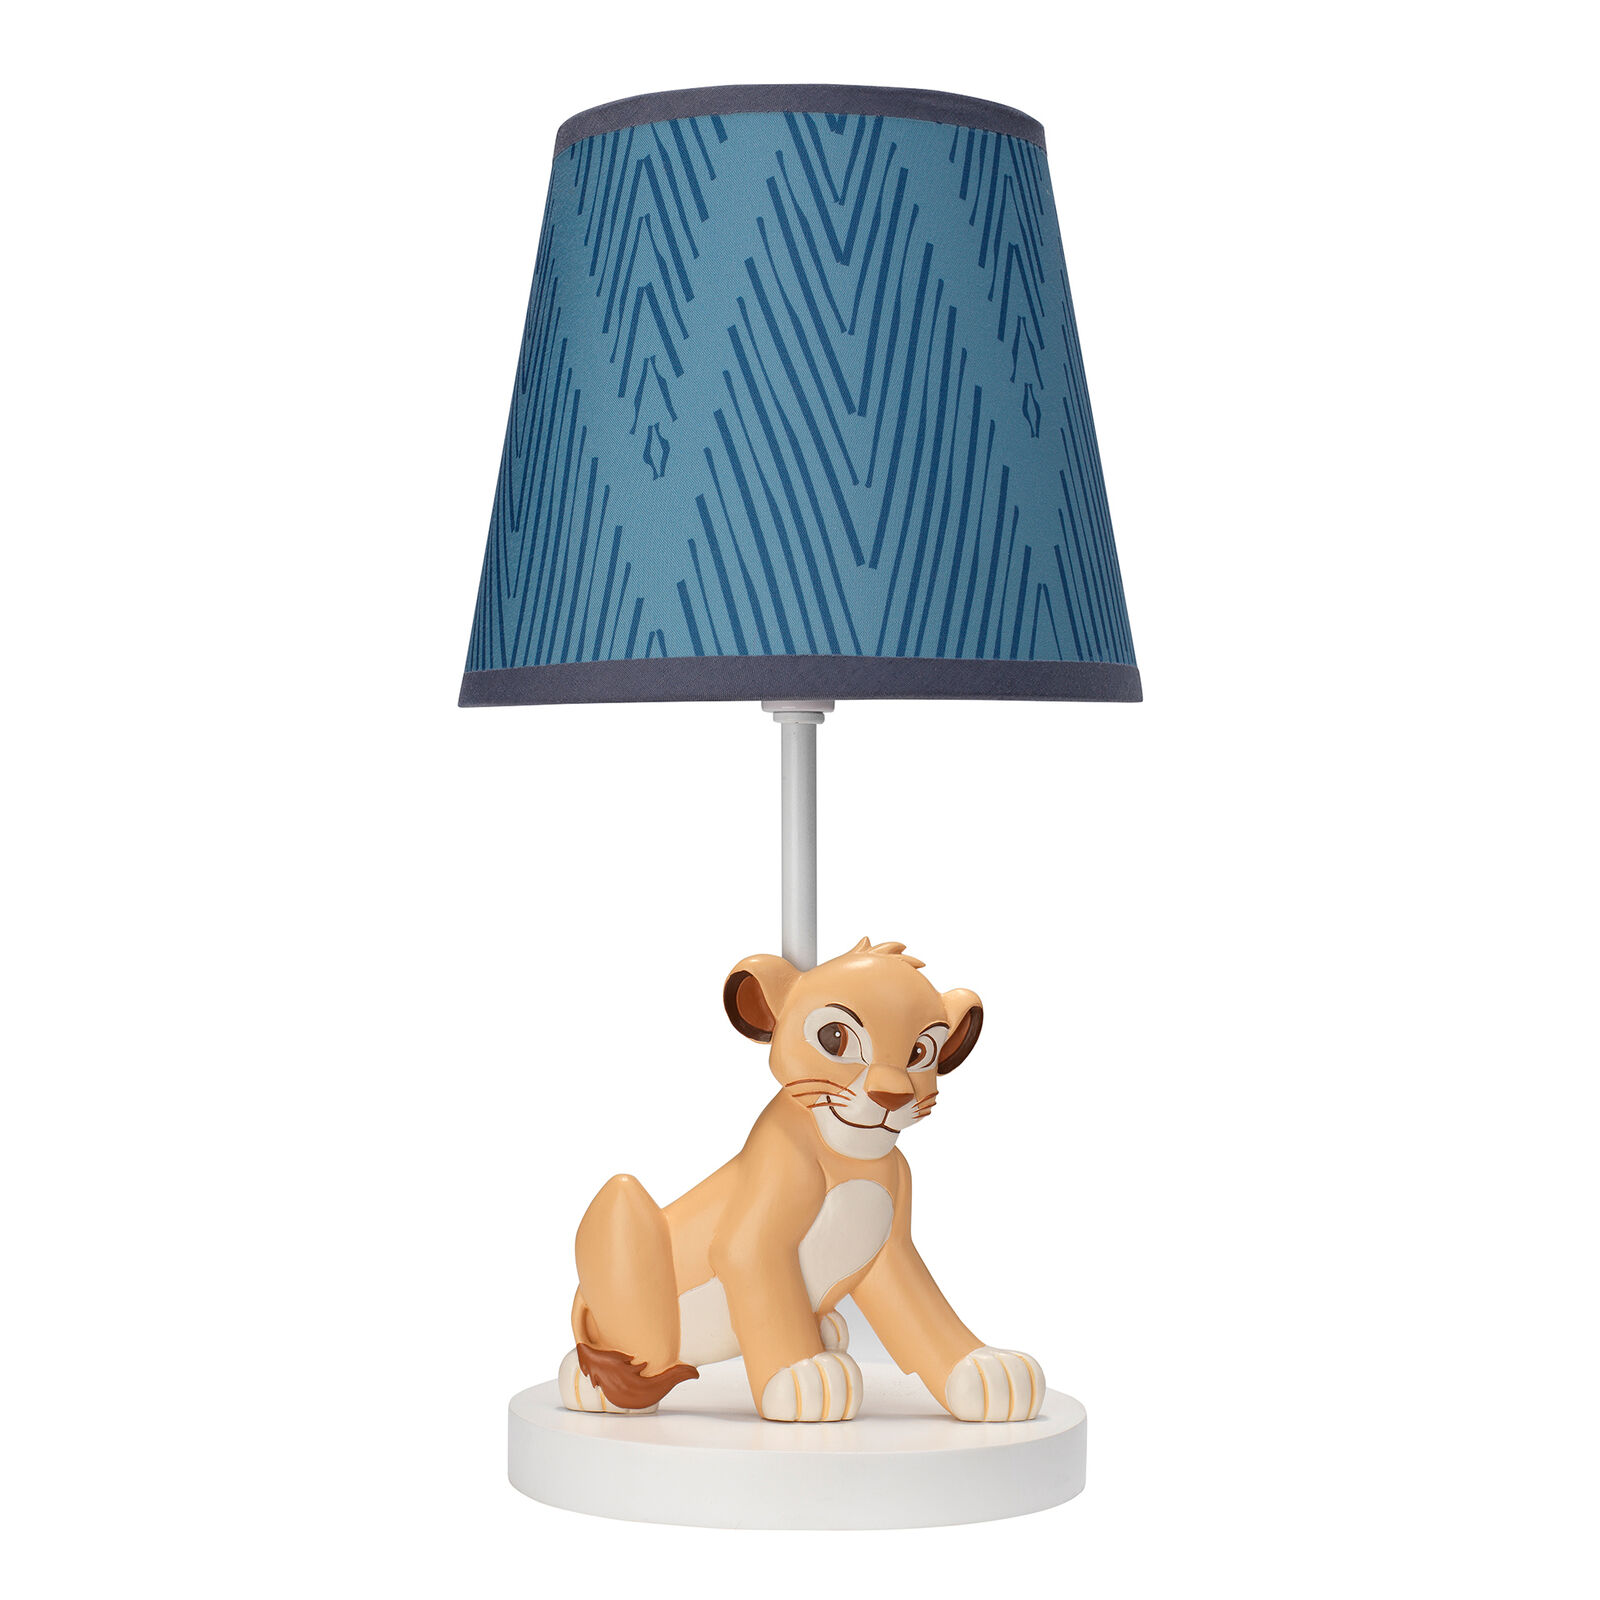 Disney Baby Lion King Adventure Lamp With Shade & Bulb  By  Lambs & Ivy - Blue